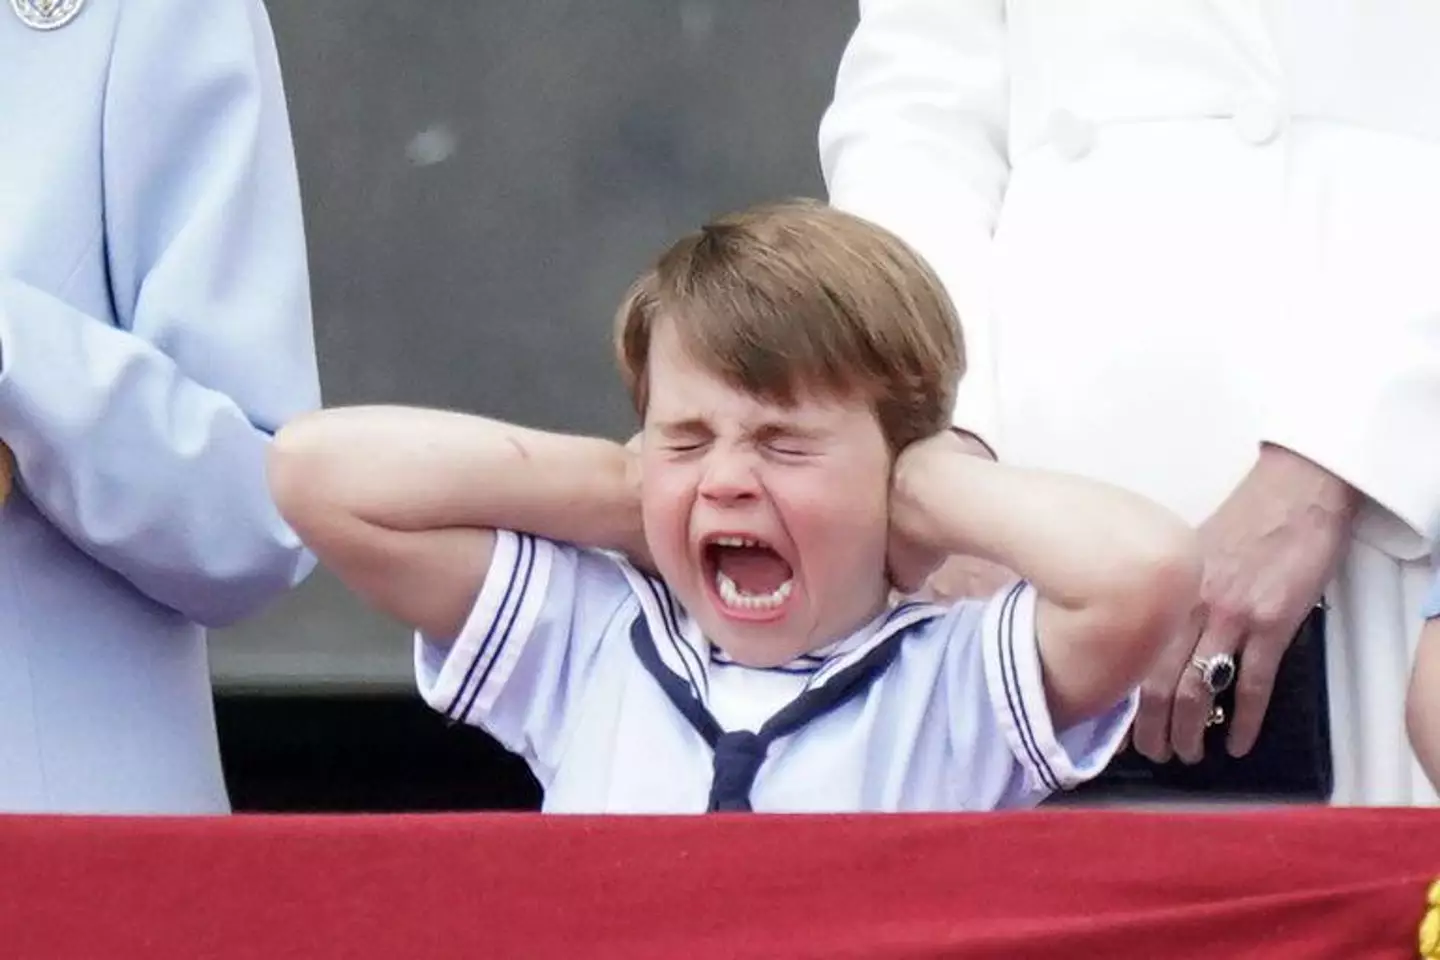 Prince Louis also misbehaved on Buckingham Palace's balcony at the Jubilee.